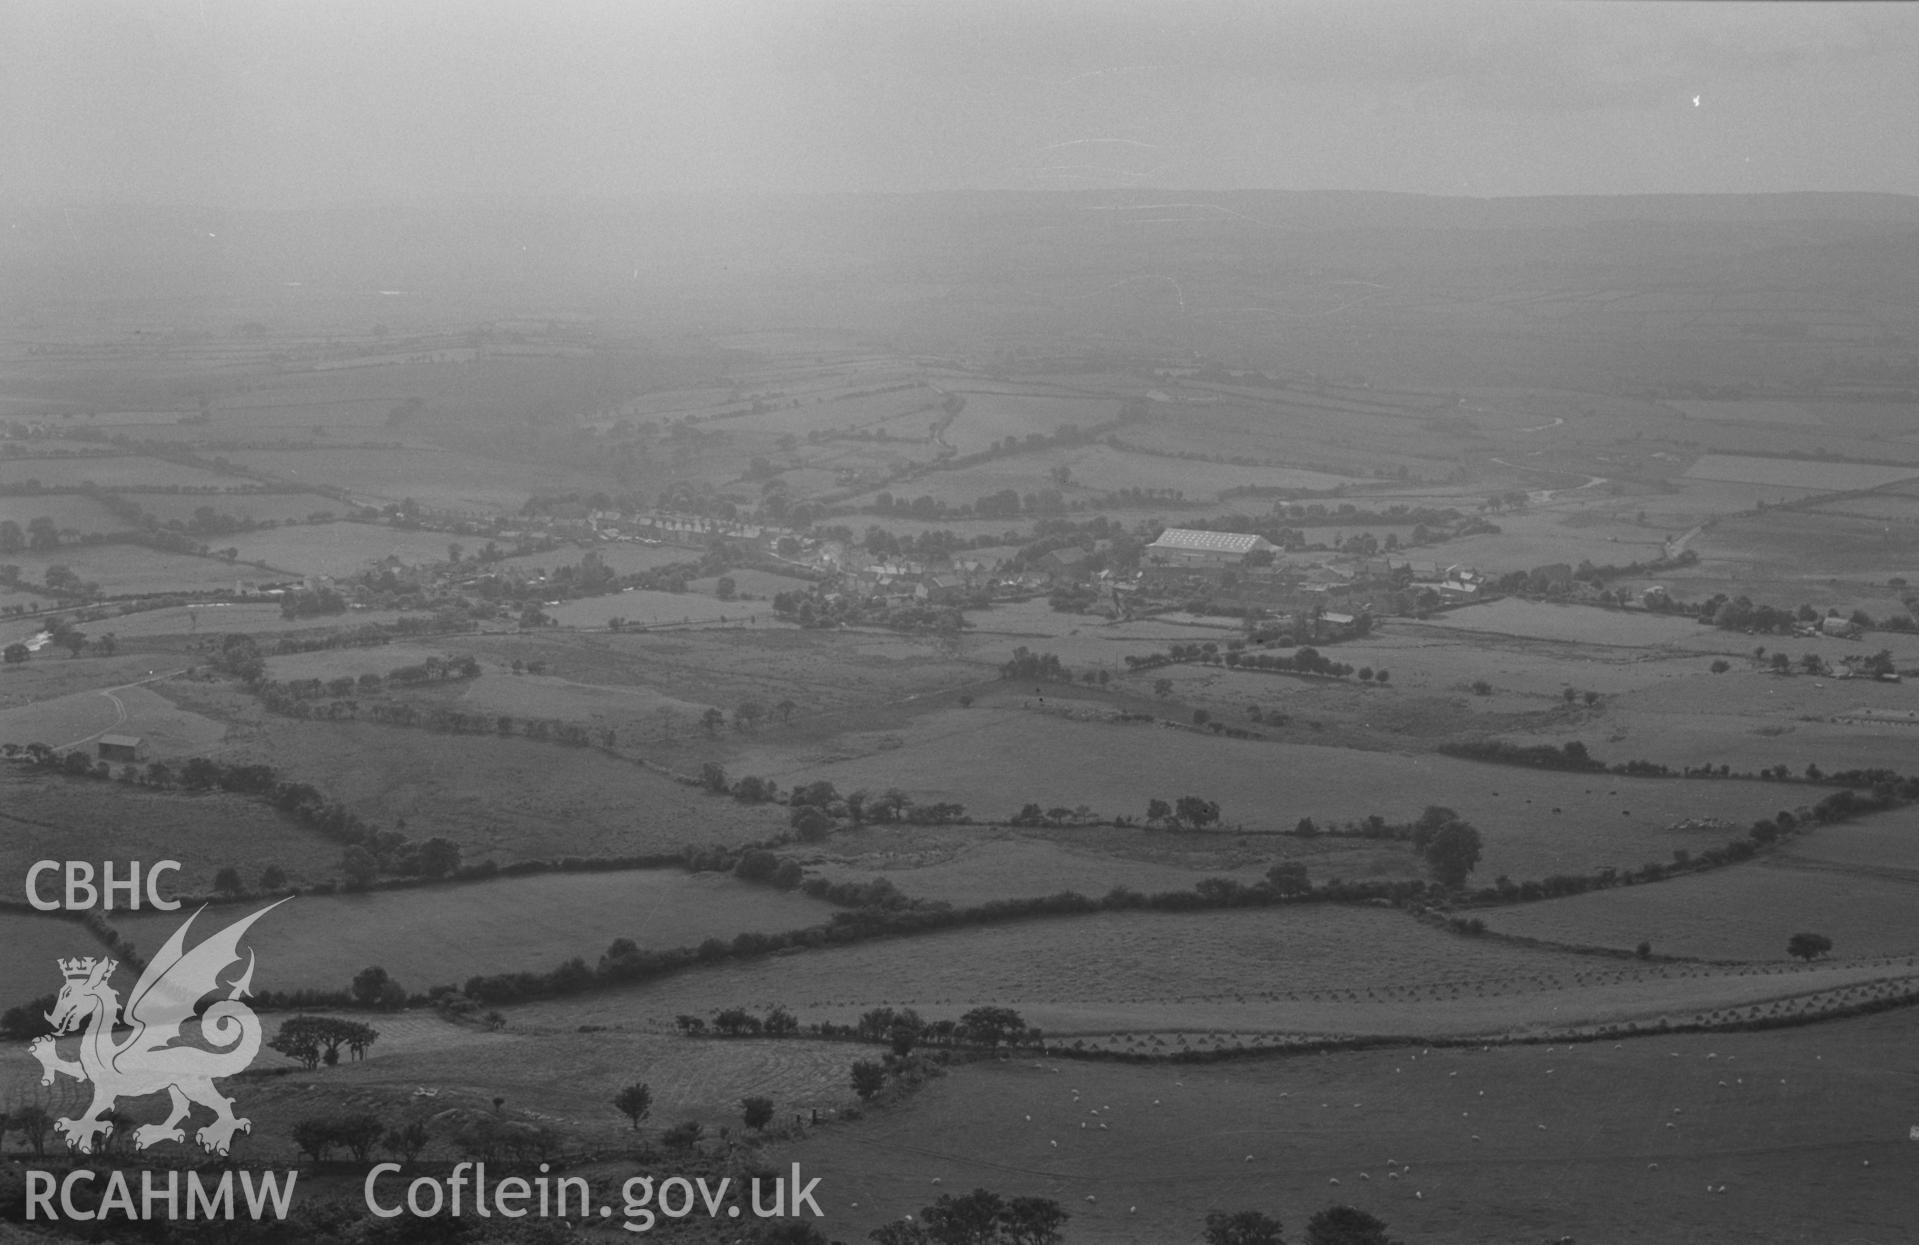 Digital copy of a black and white negative showing view from Pen-y-Bannau hill fort towards Pontrhydfendigaid. Photographed by Arthur O. Chater on 25th August 1967 looking west south west from Grid Reference SN 742 669.